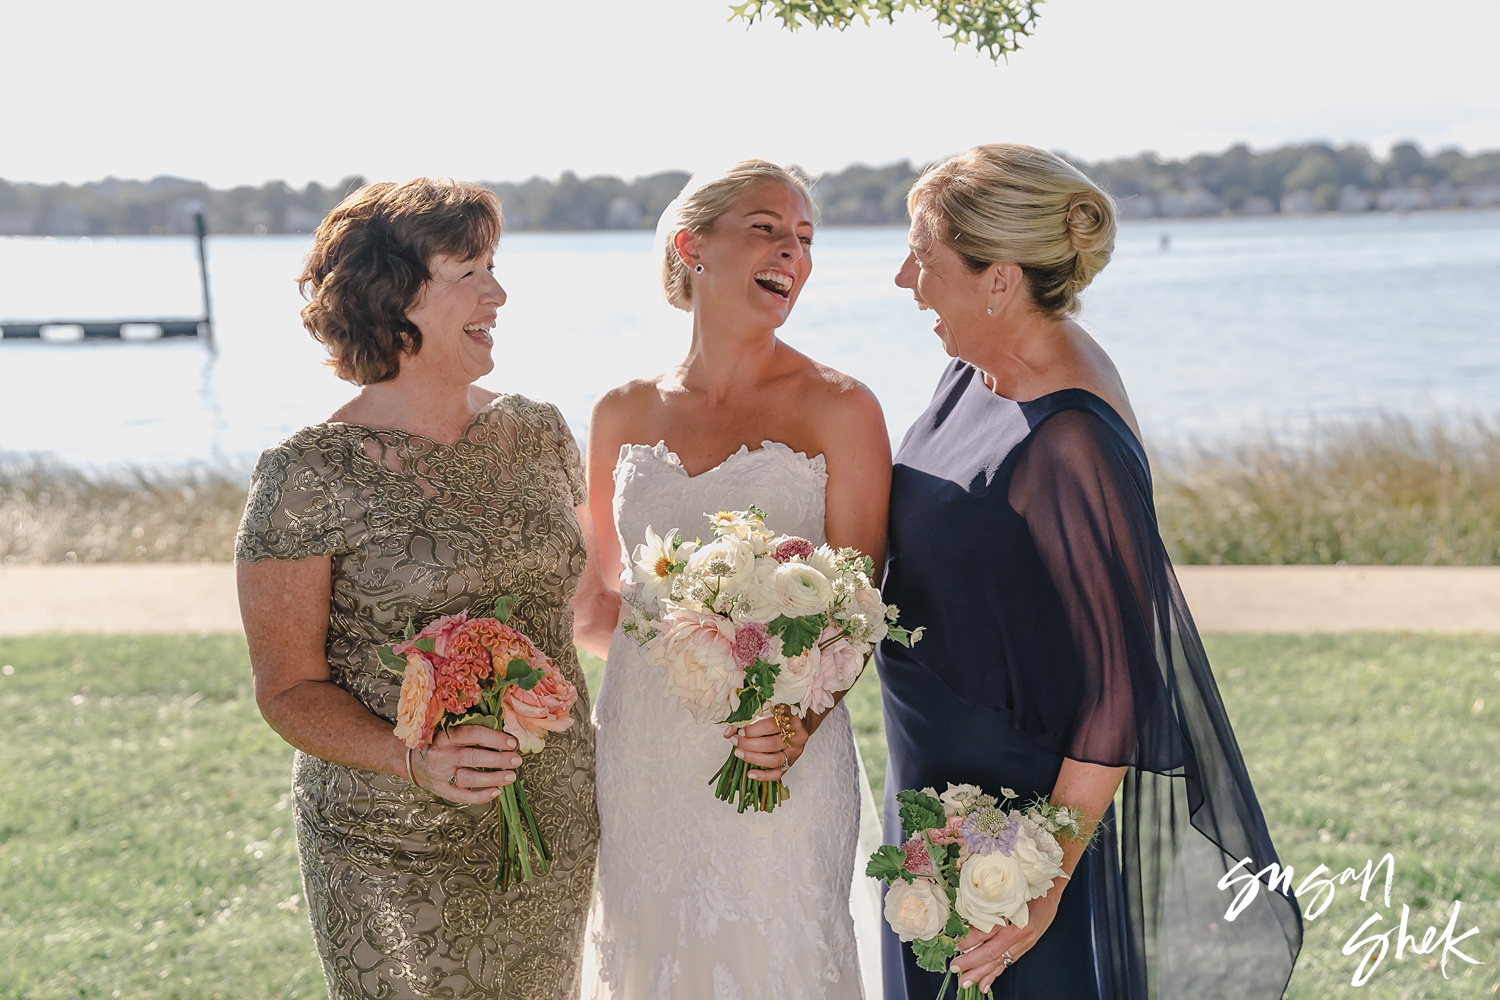 Connecticut weddings, Shore and Country Club Wedding, Weddings in Connecticut, Pronovias Wedding Dress, CT Wedding Photographer, NYC Wedding Photographer,